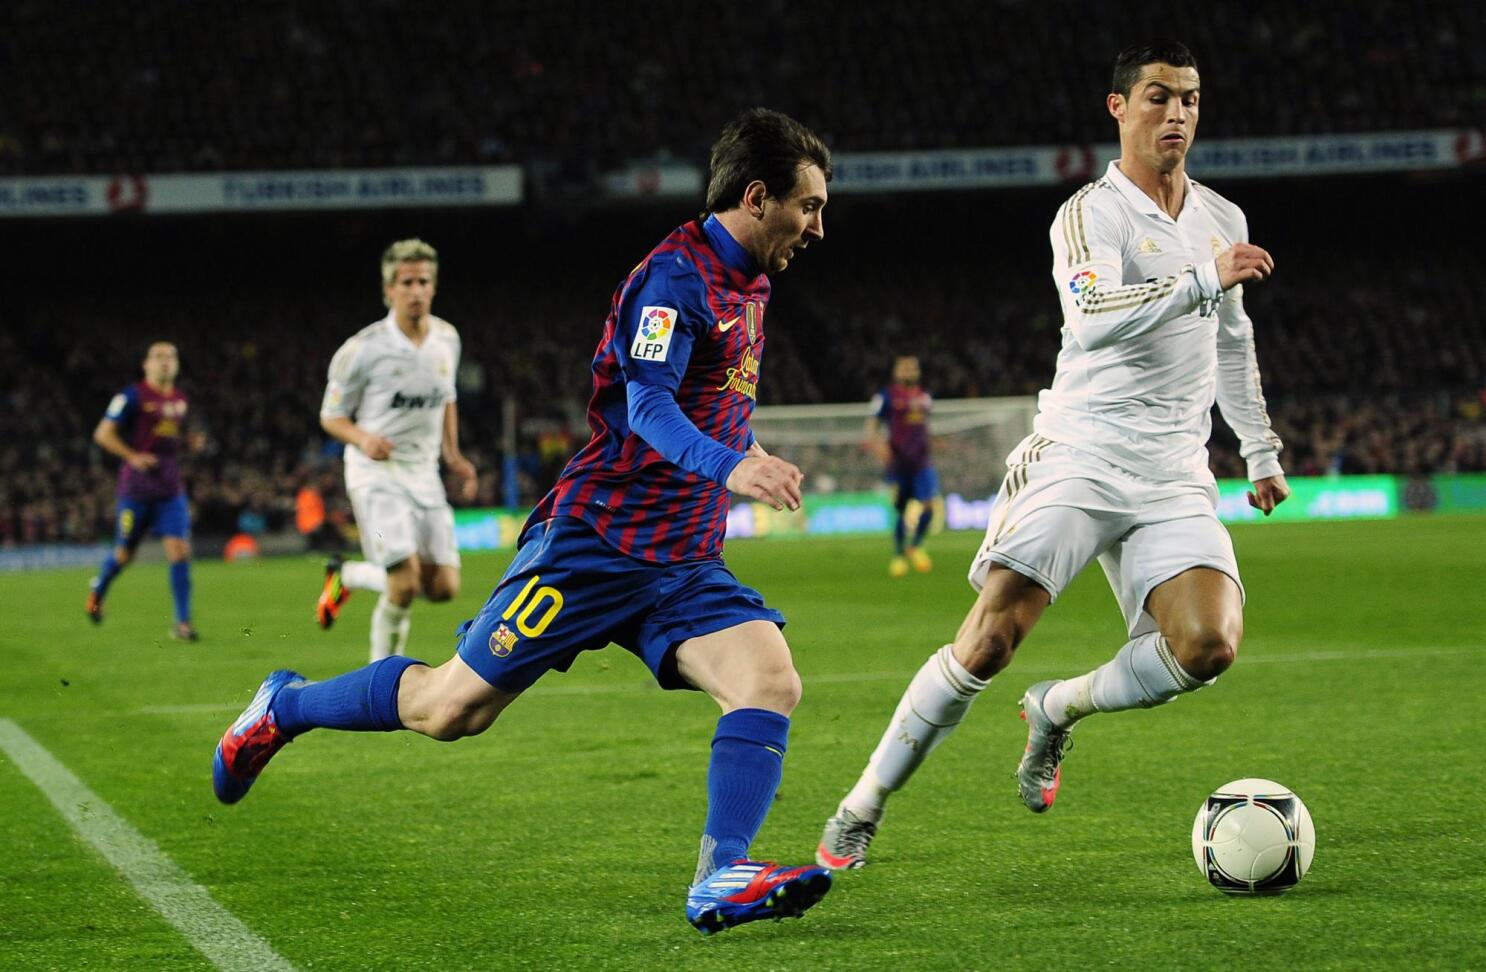 The Football Arena on X: Lionel Messi and Cristiano Ronaldo both